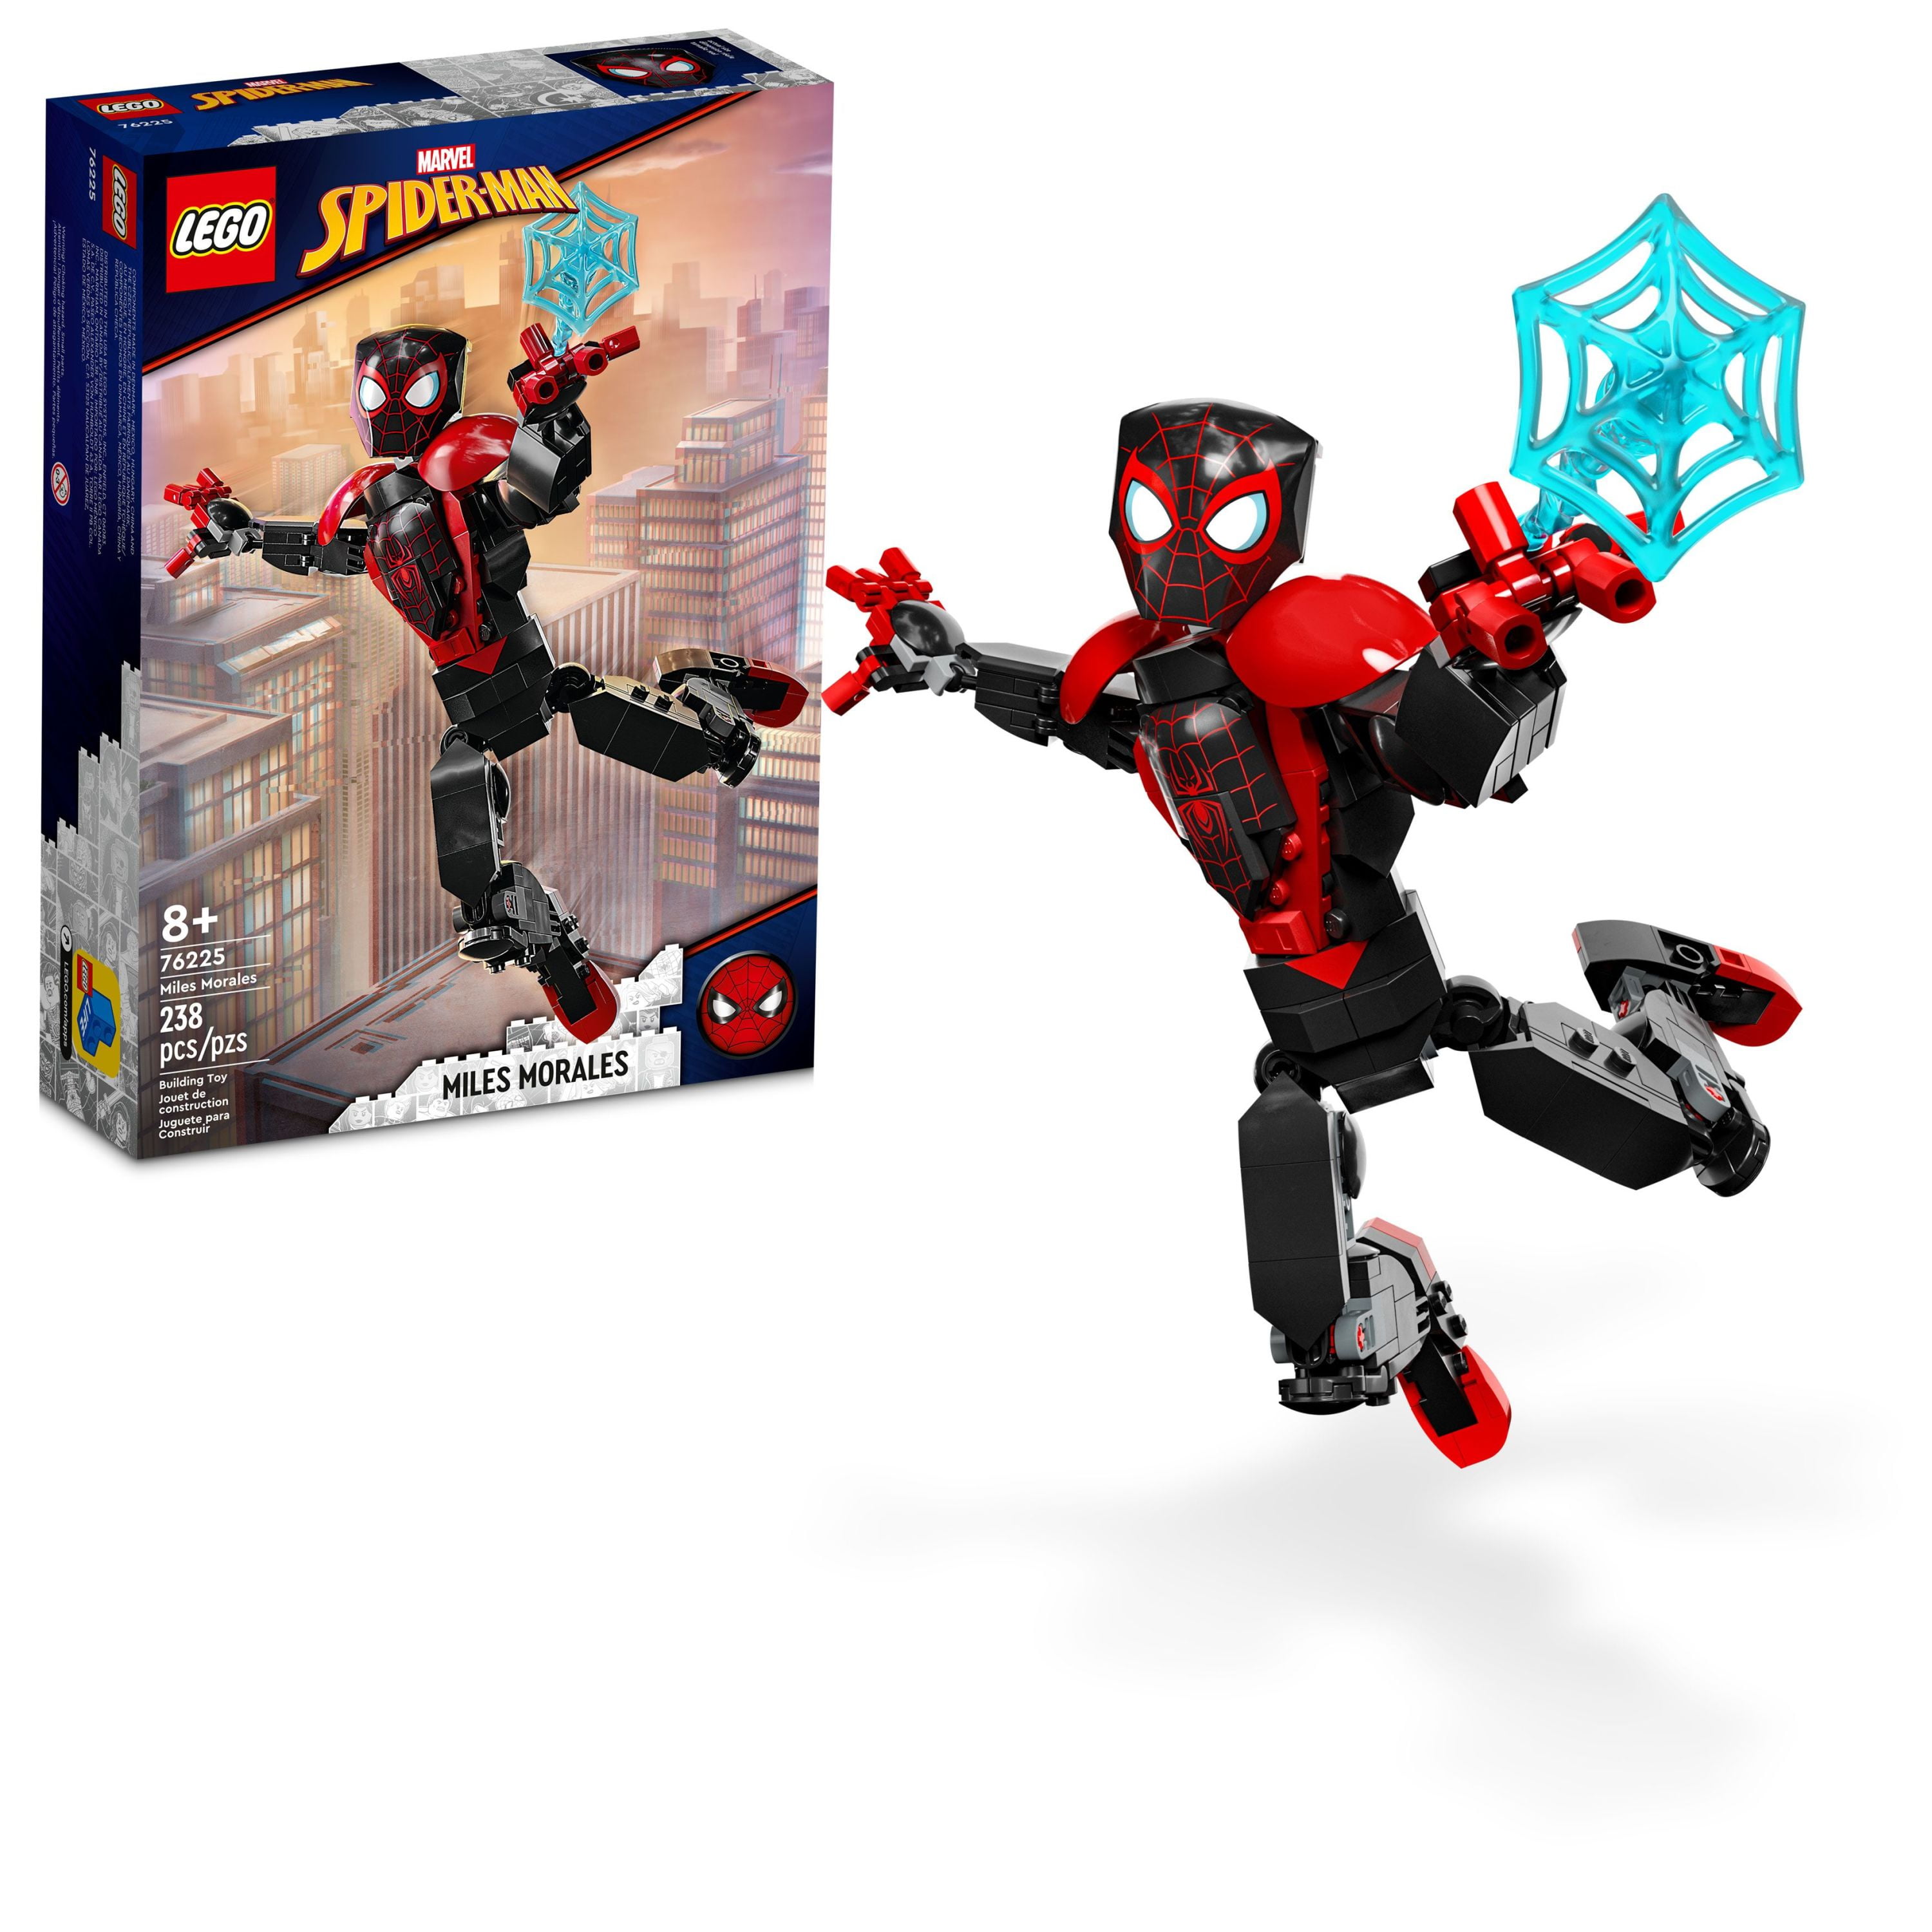 LEGO Marvel Miles Morales Figure Set, 76225 Fully Articulated Spider-Man  Action Toy, Super Hero Movie Collectible, Birthday Gift Idea for Kids -  